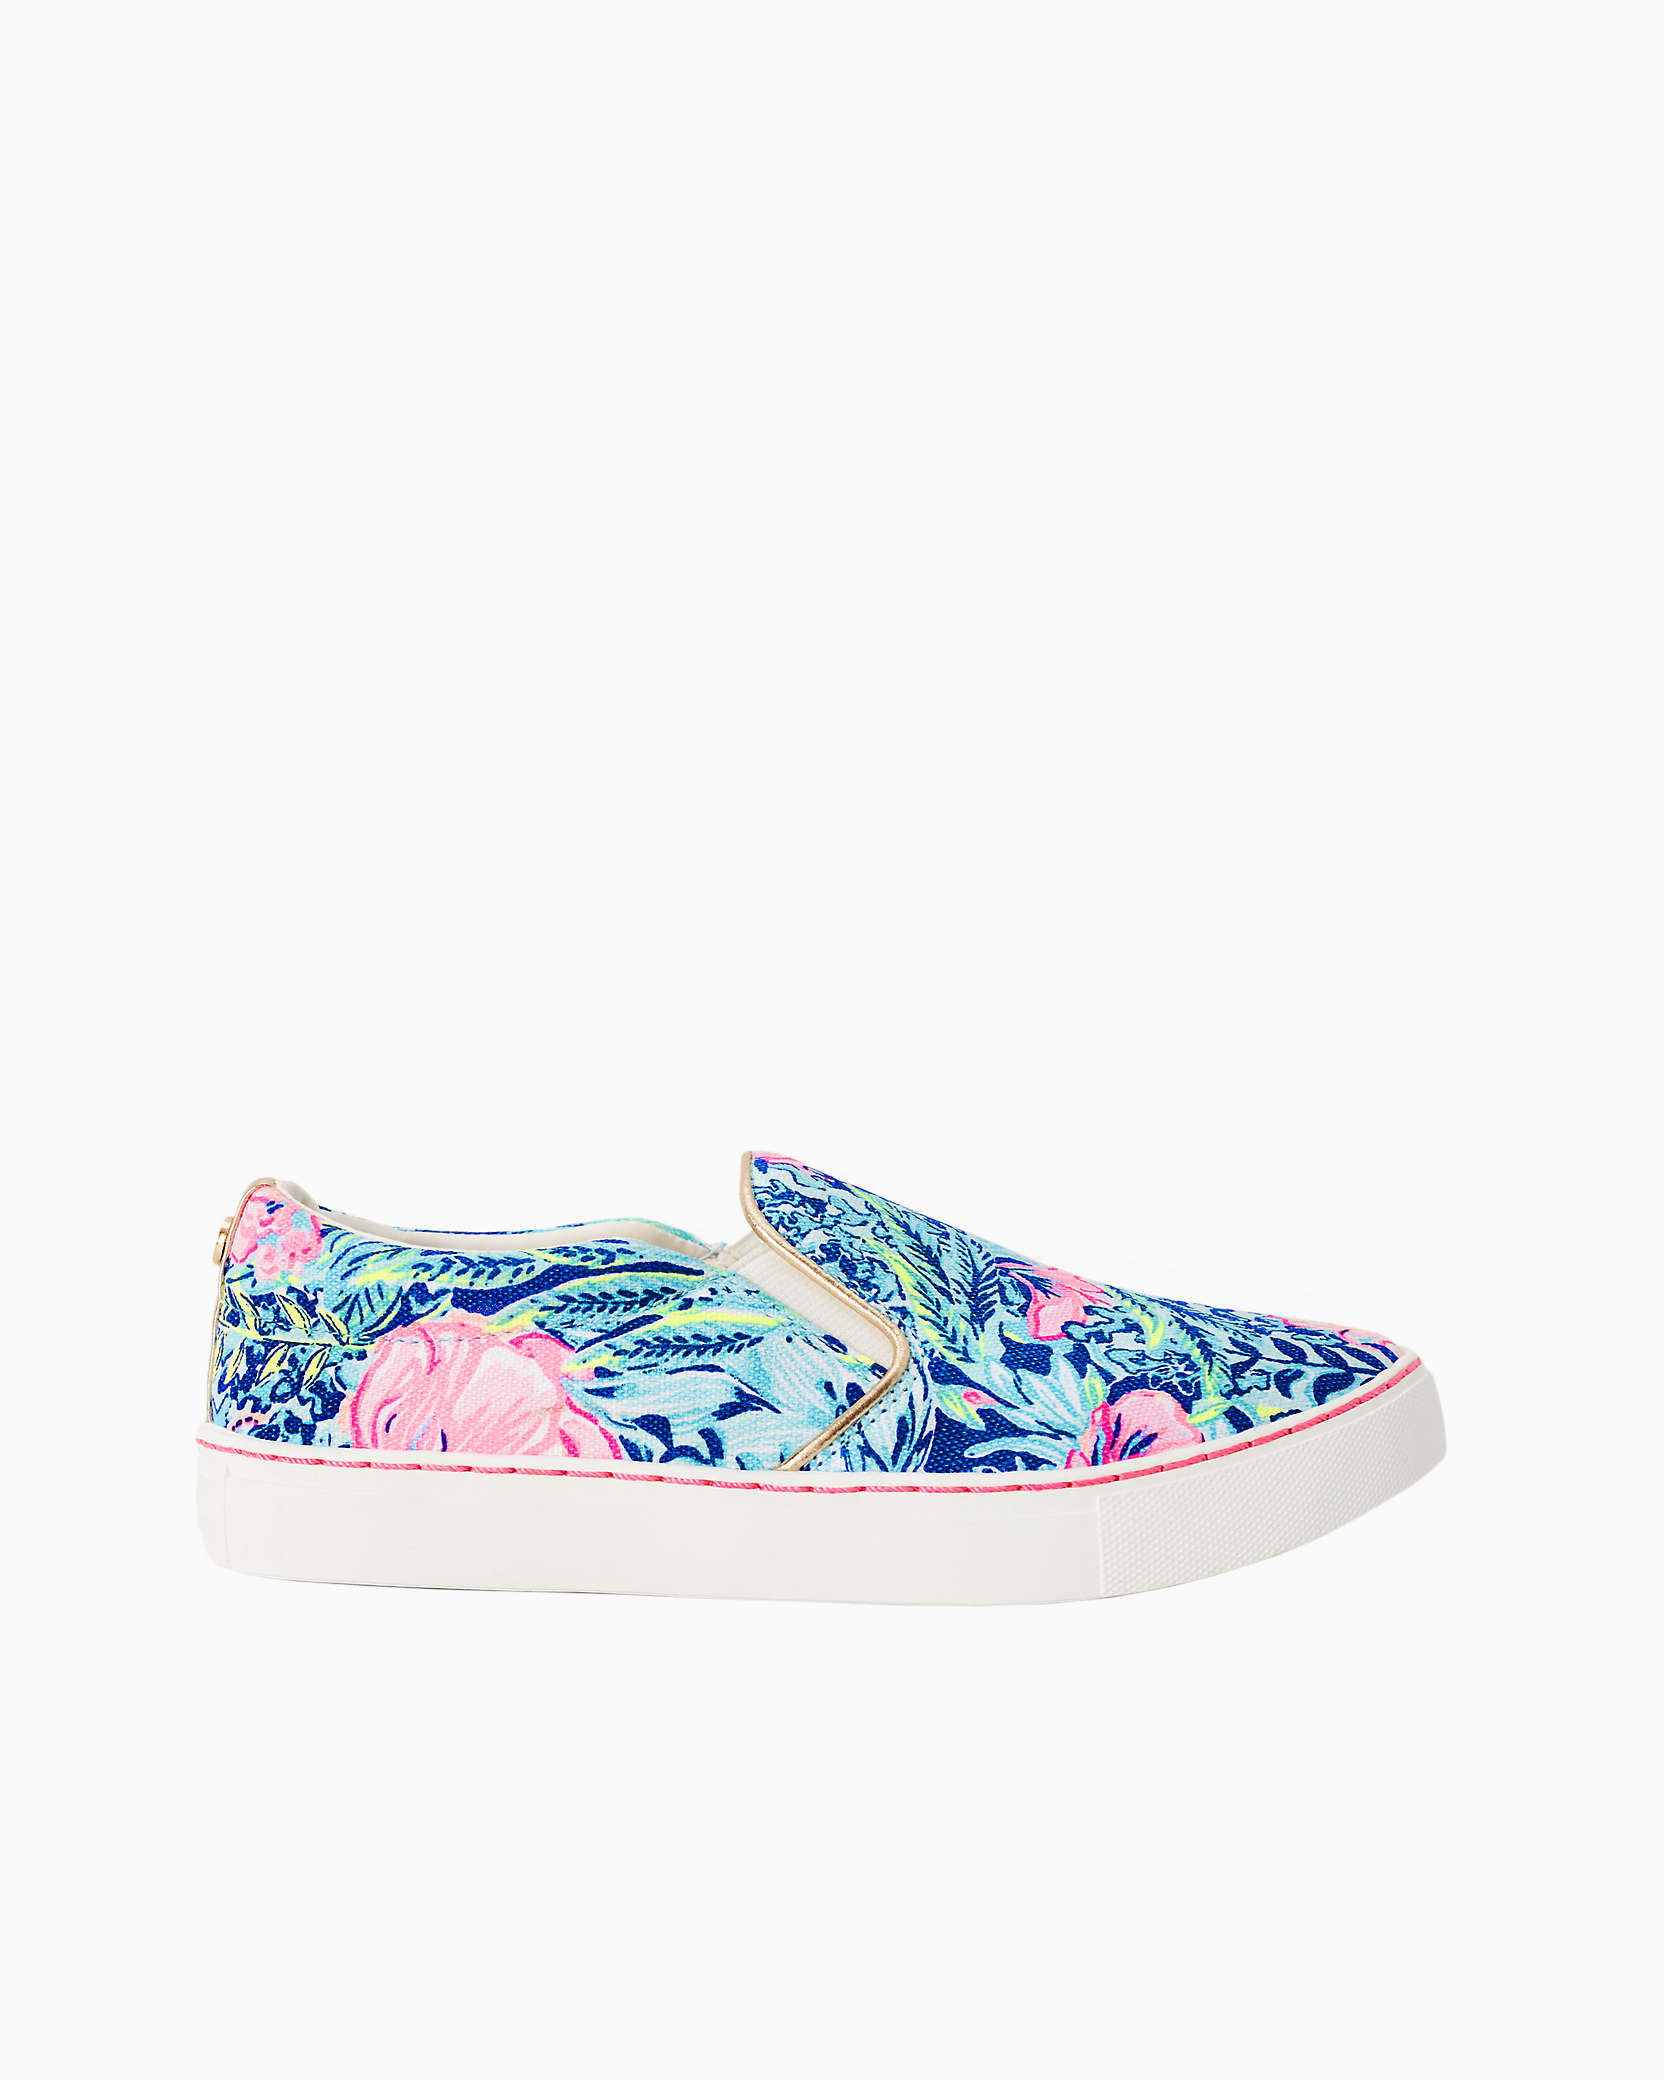 Lilly Pulitzer Julie Sneaker In Lapis Lazuli Beach Club Blooms Accessories Small